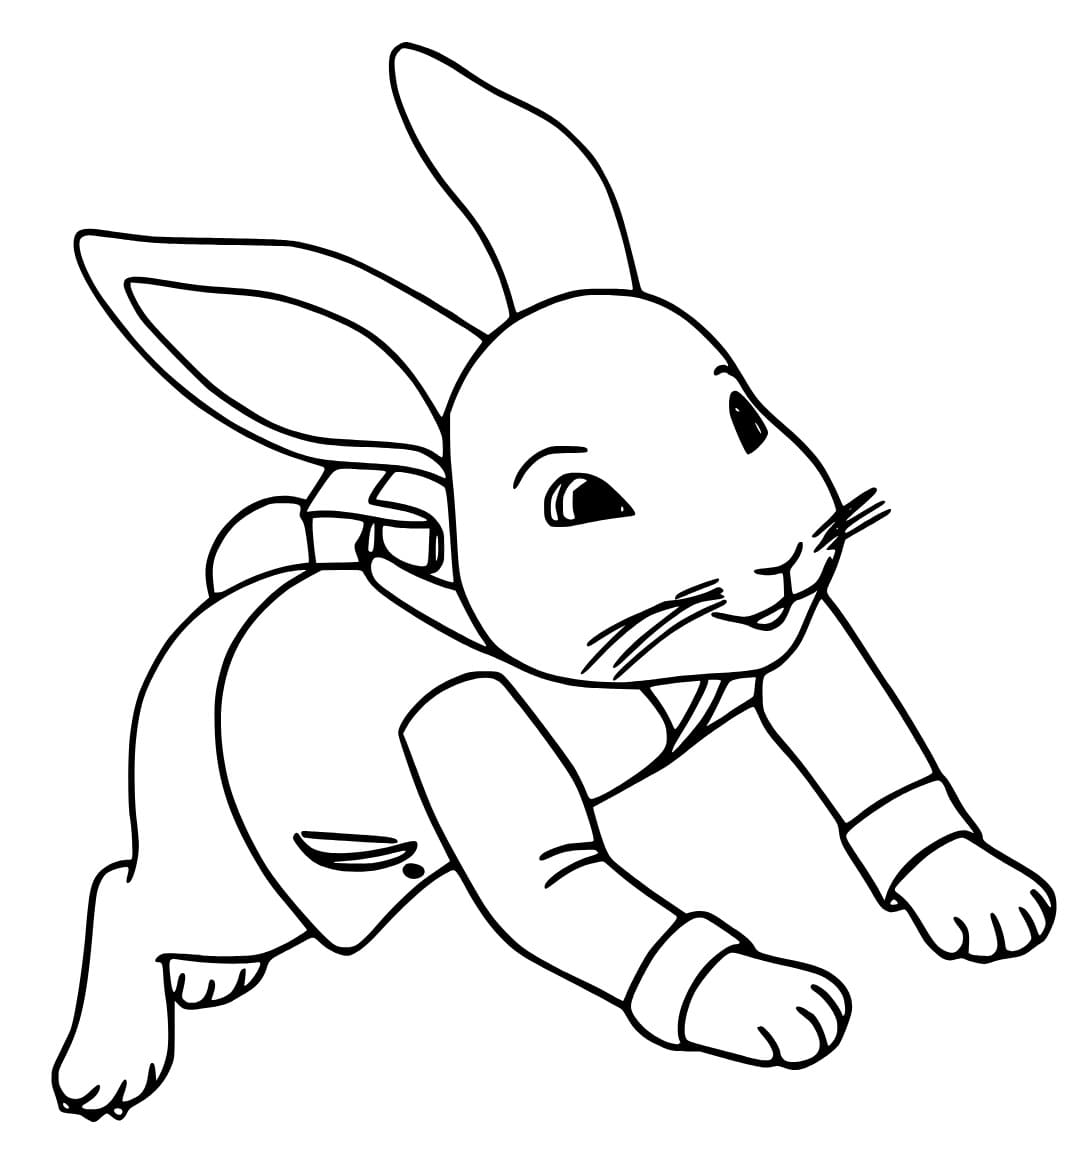 Cute peter rabbit coloring page